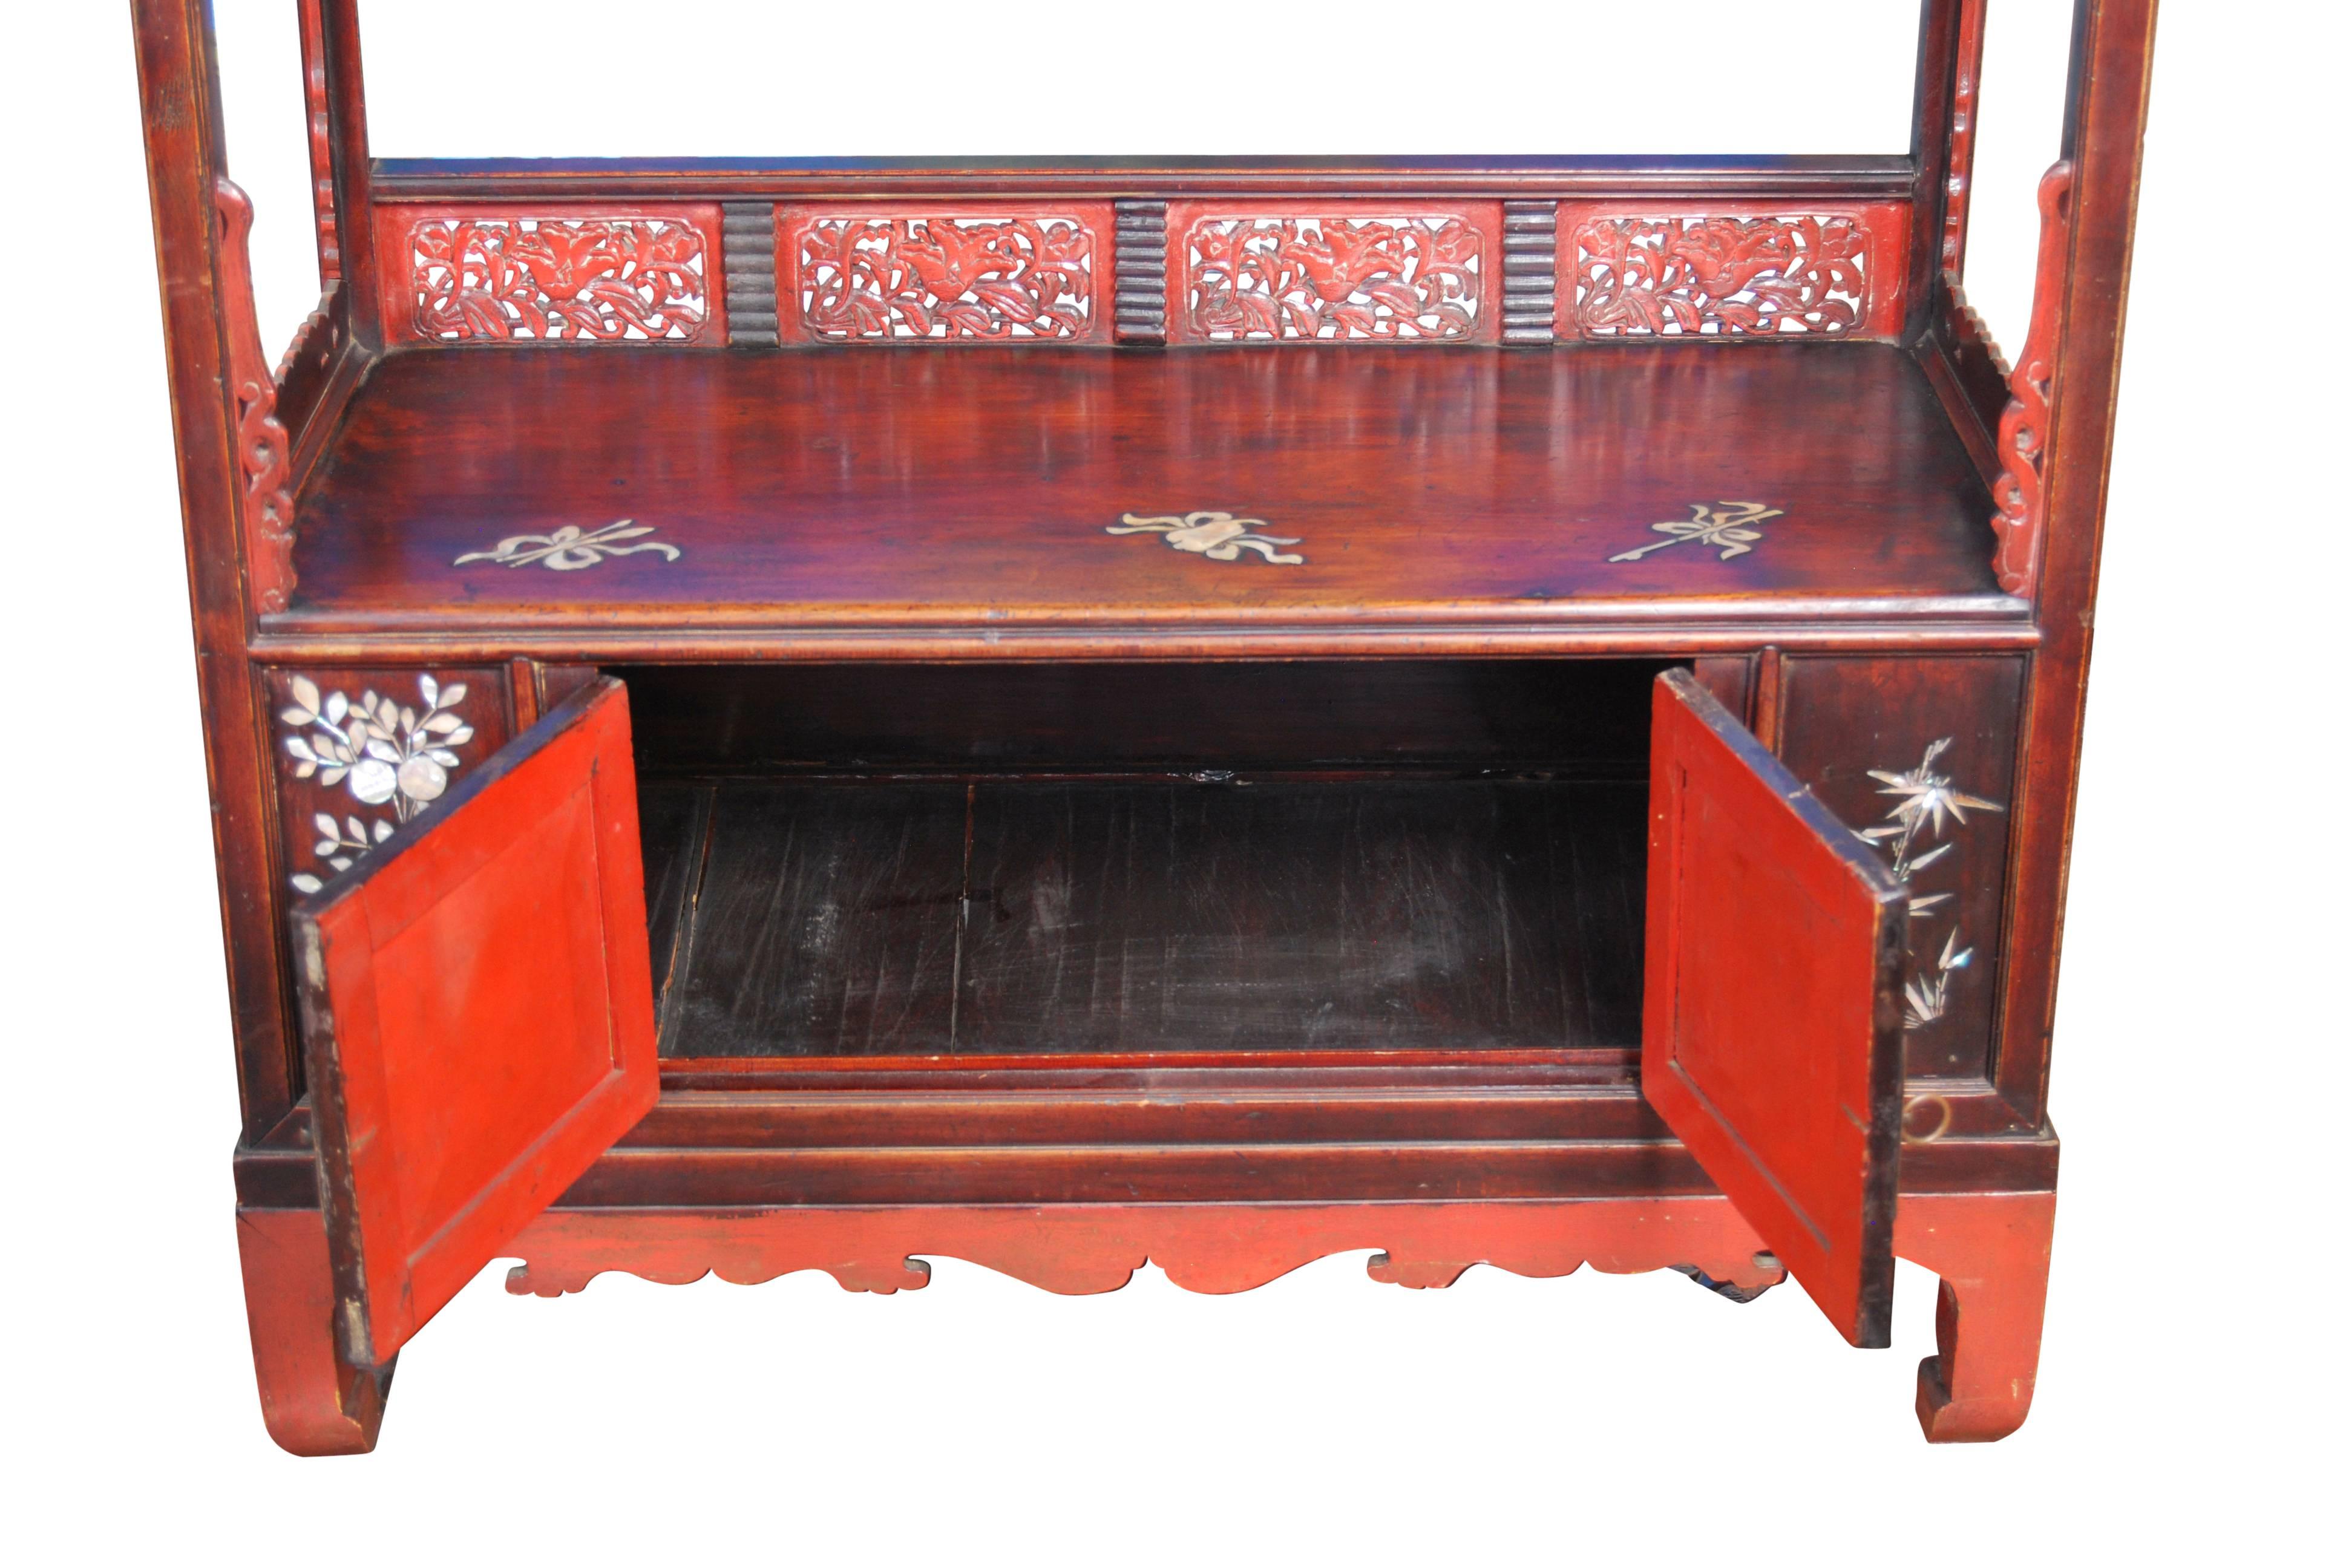 Antique Korean Bookshelf with Inlaid Mother-of-Pearl, 19th Century 4